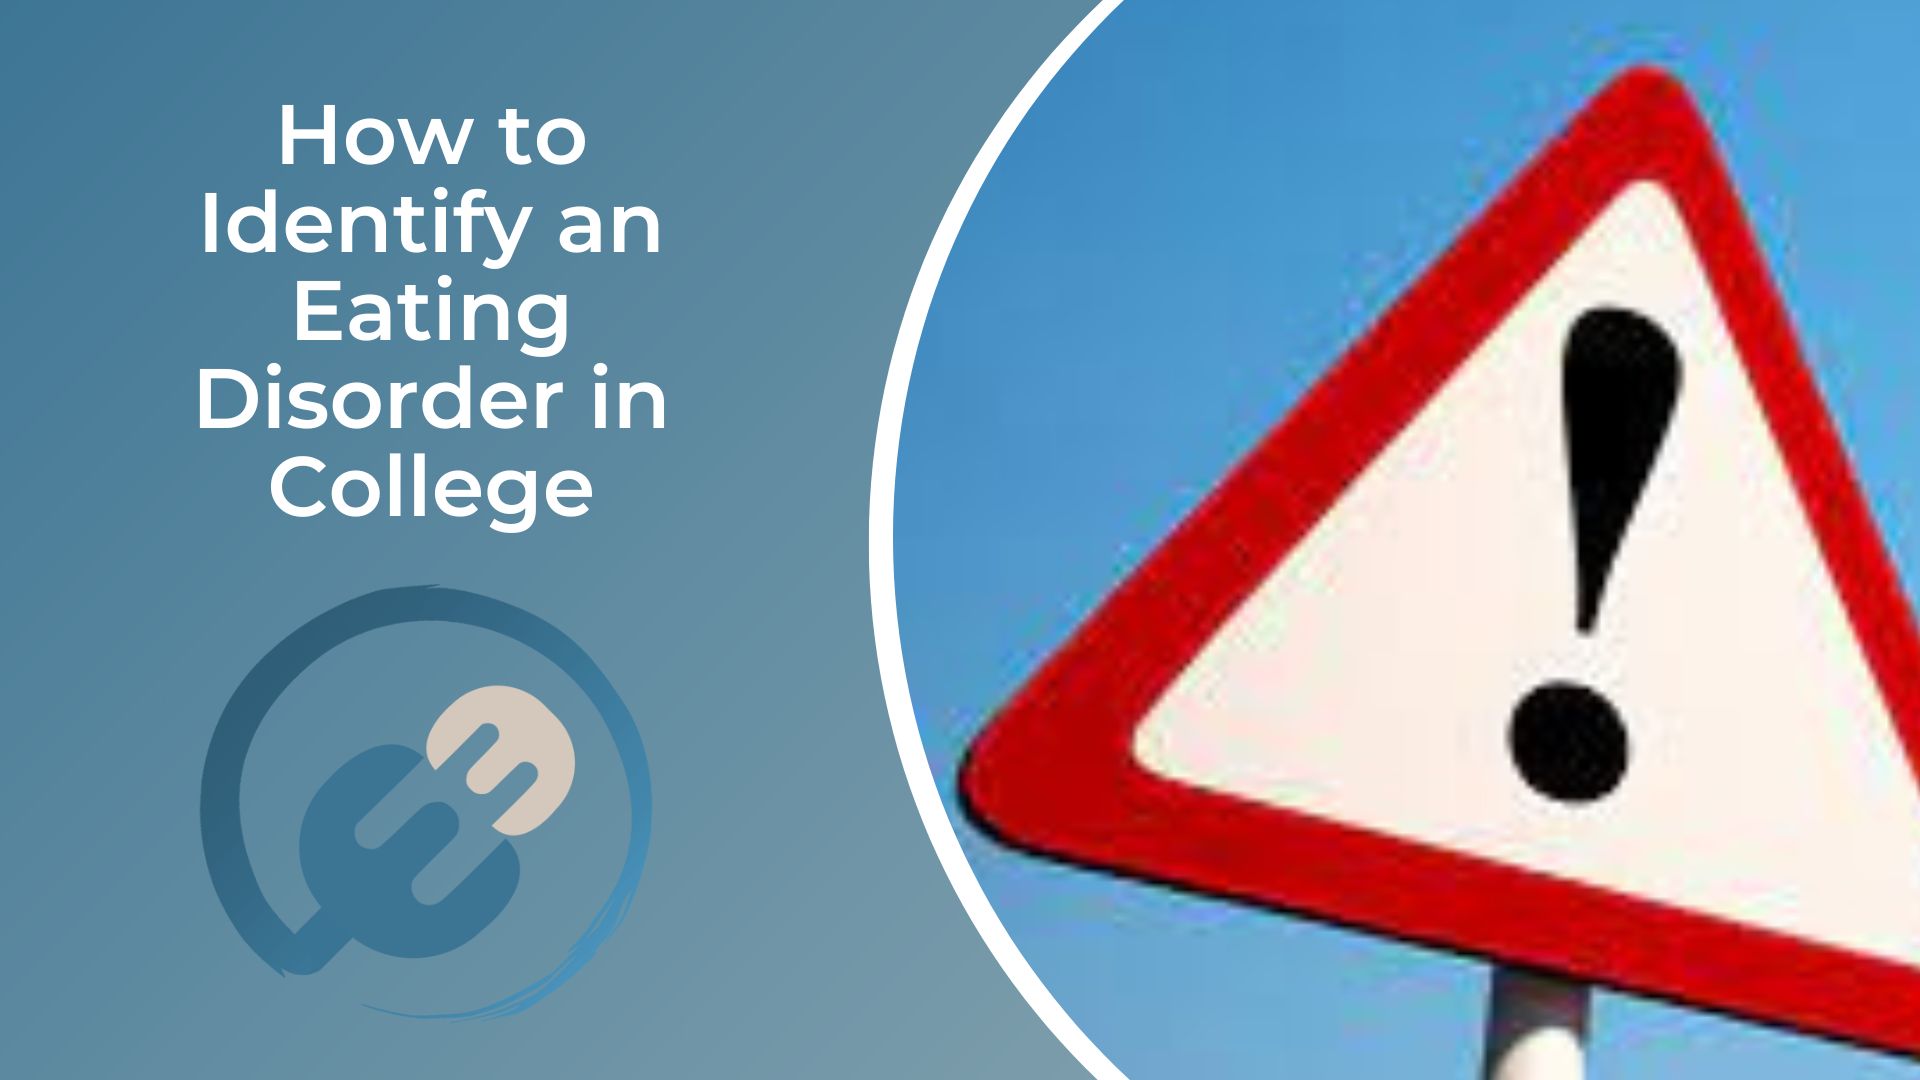 How to Identify an Eating Disorder in College 6 Warning Signs